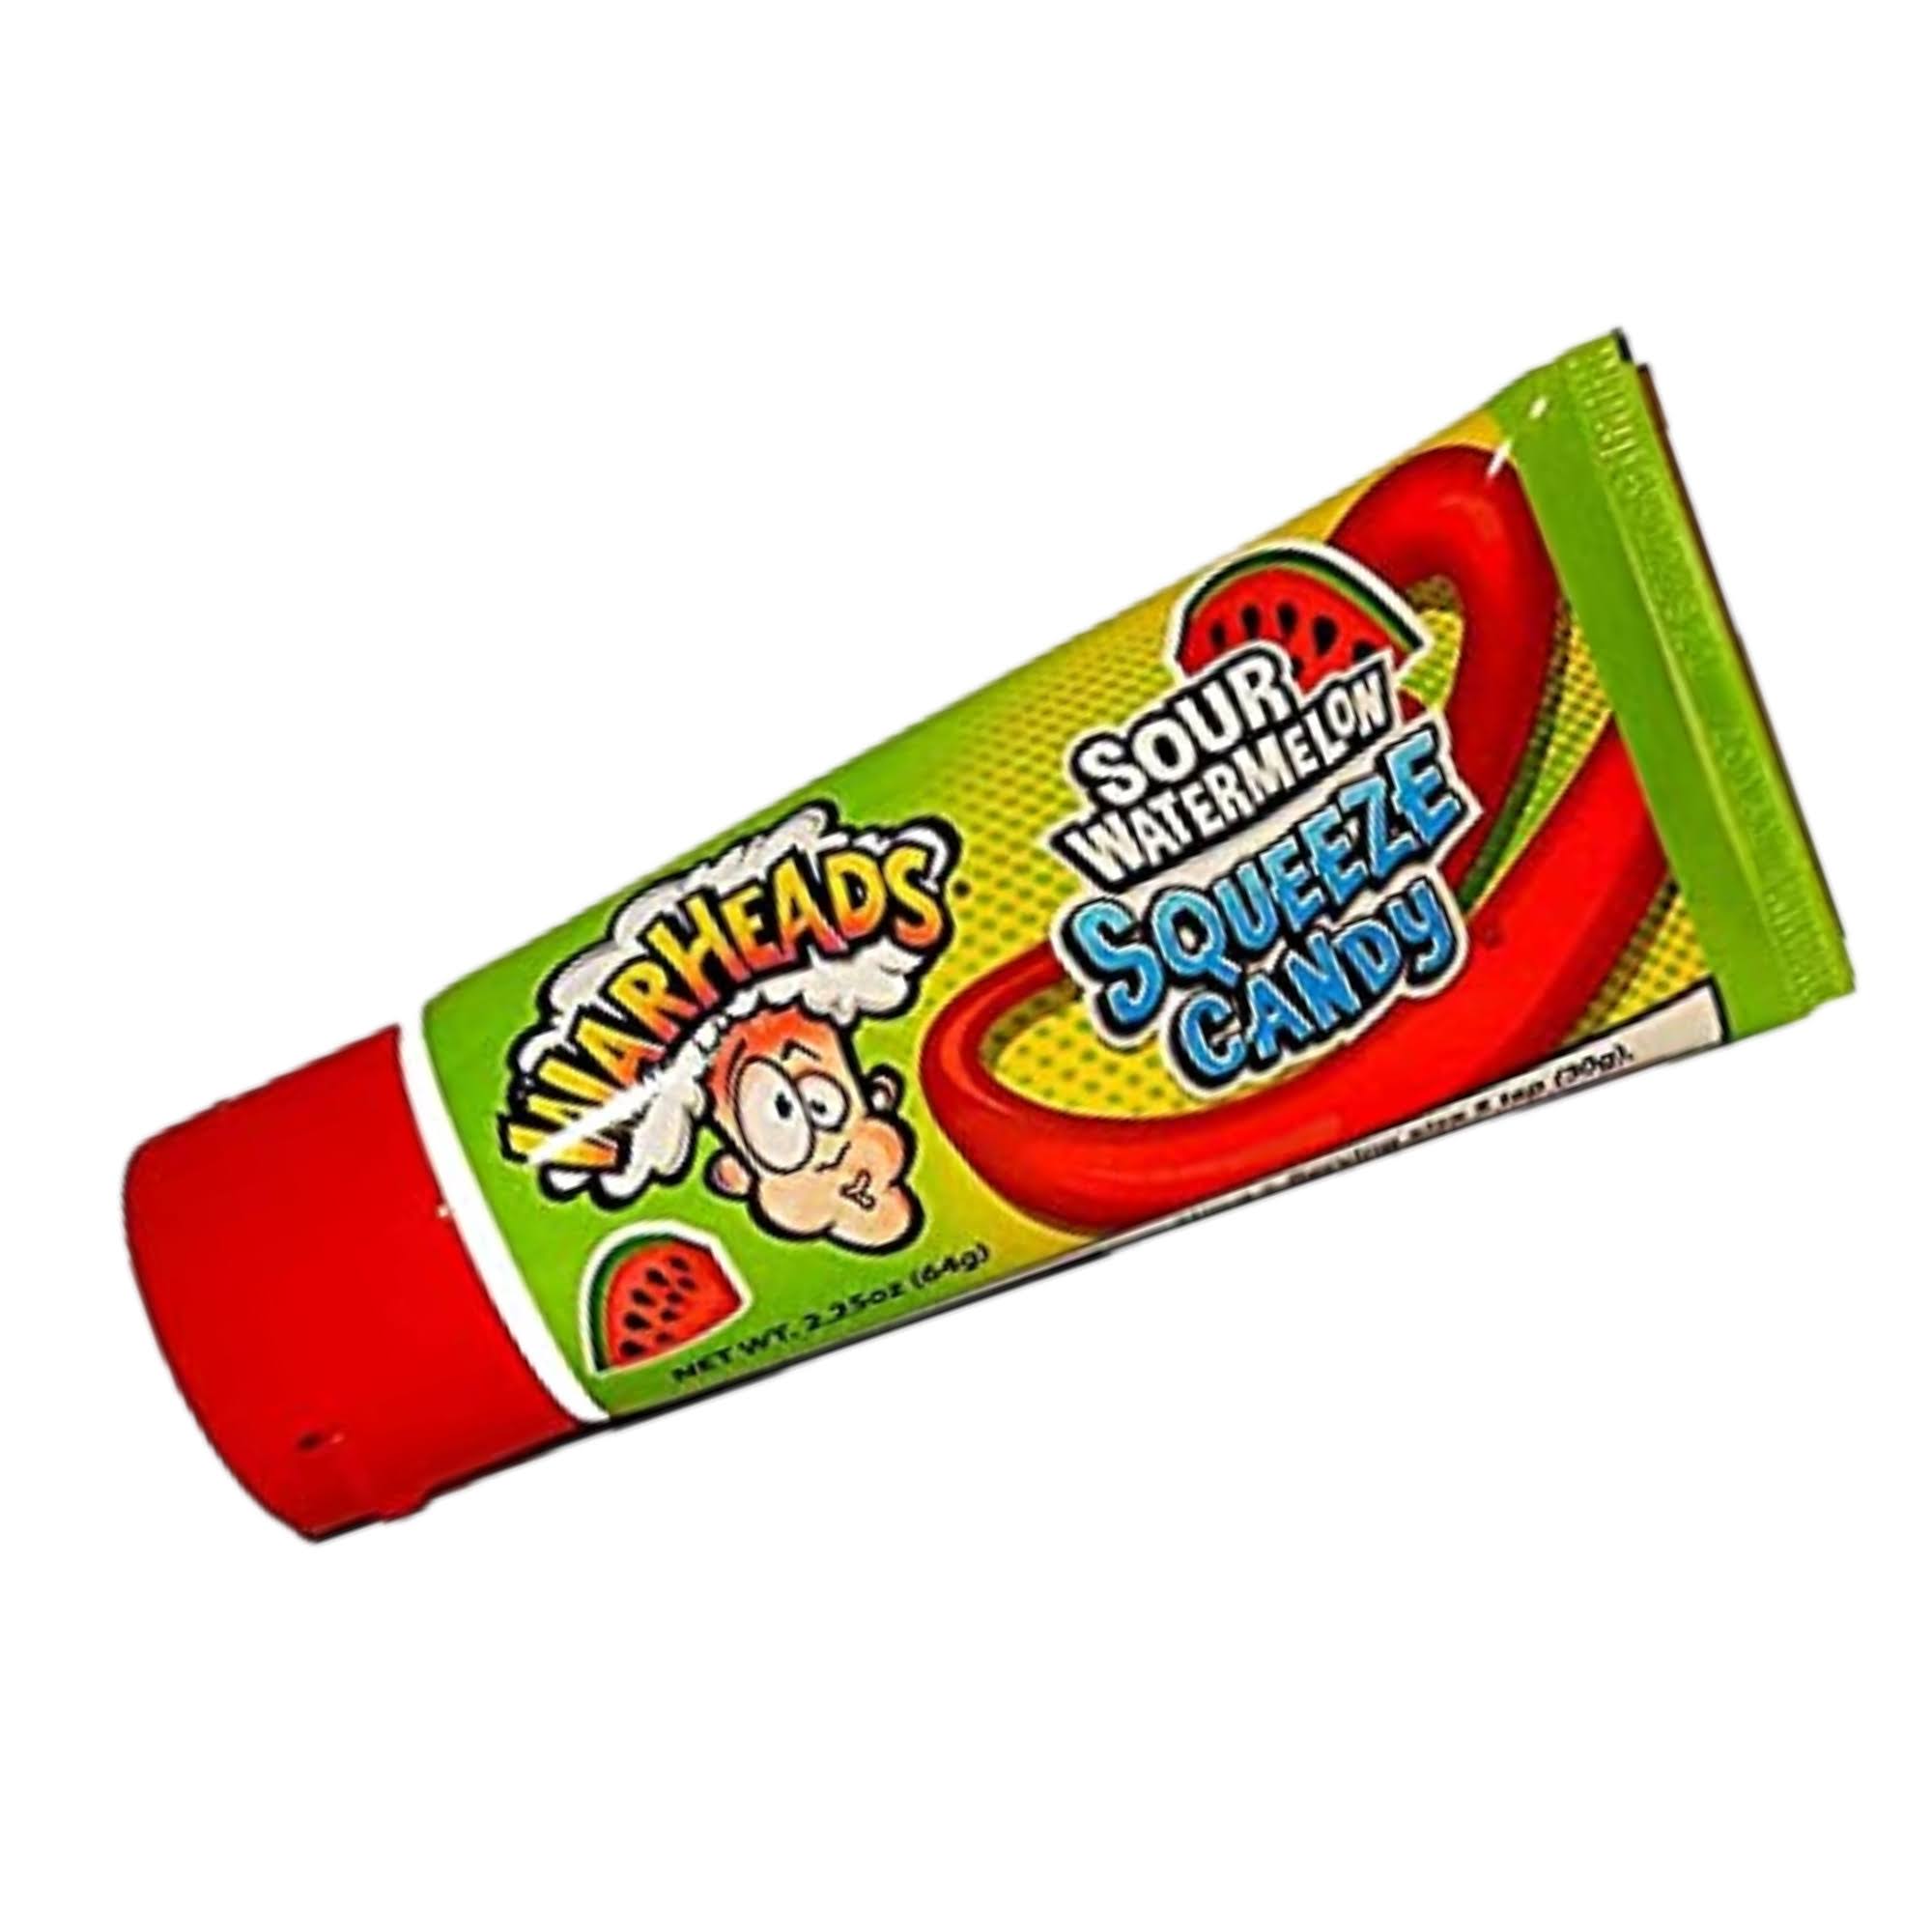 WarHeads Sour Watermelon Squeeze Candy